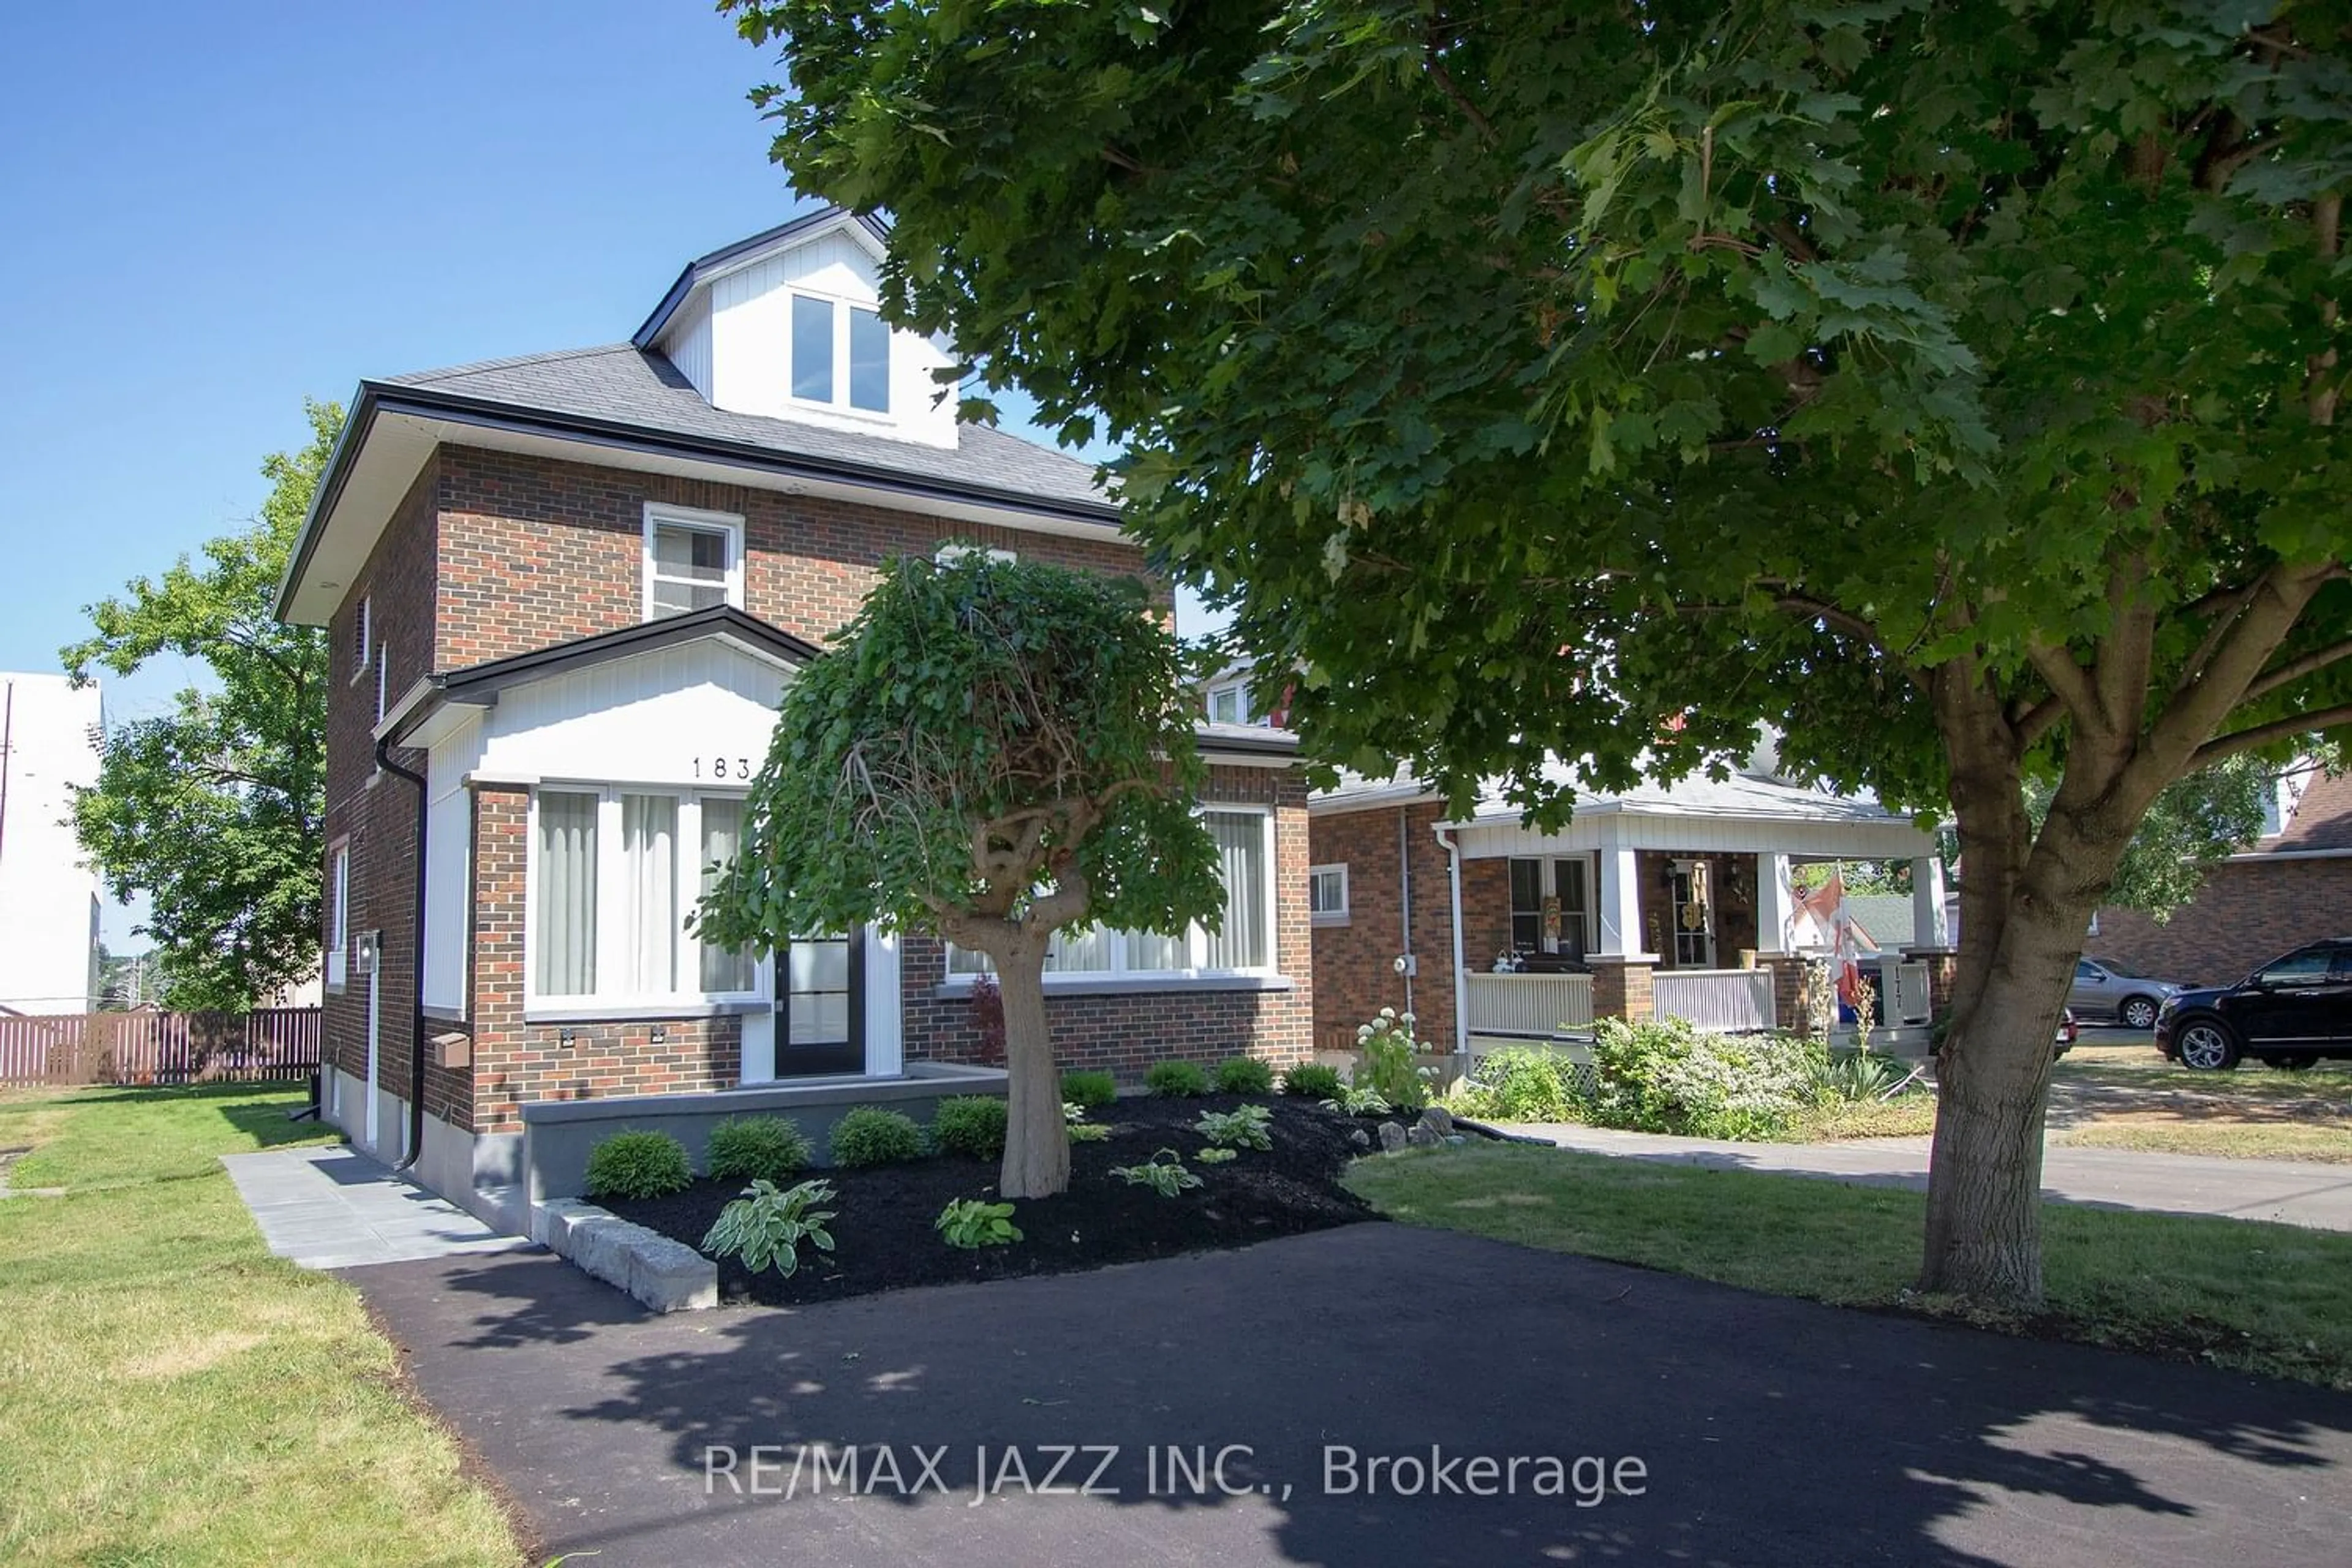 Frontside or backside of a home for 183 Gibbons St, Oshawa Ontario L1J 4Y1